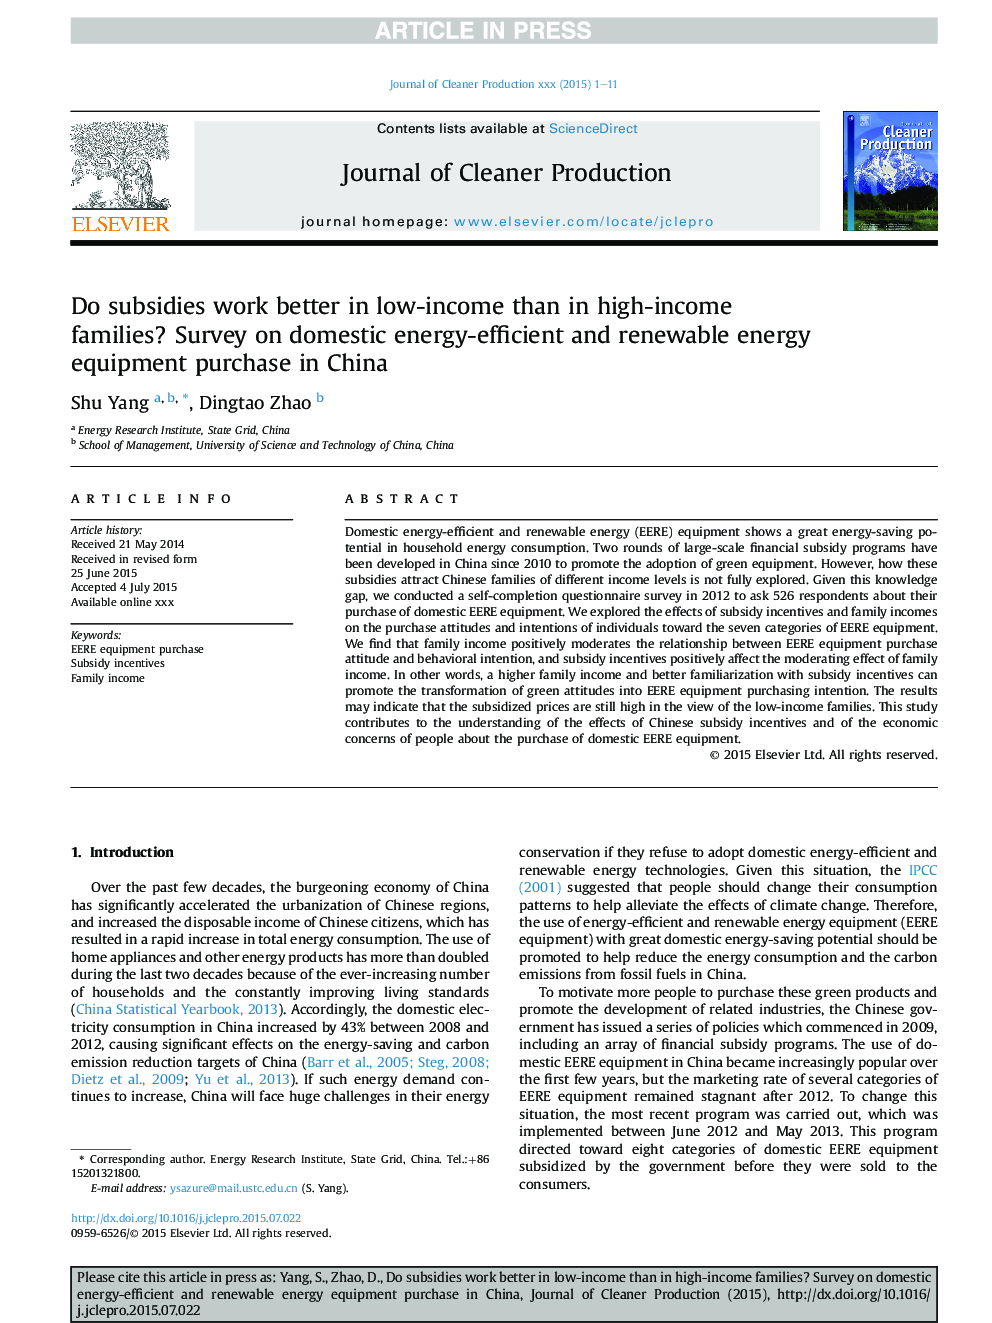 Do subsidies work better in low-income than in high-income families? Survey on domestic energy-efficient and renewable energy equipment purchase in China